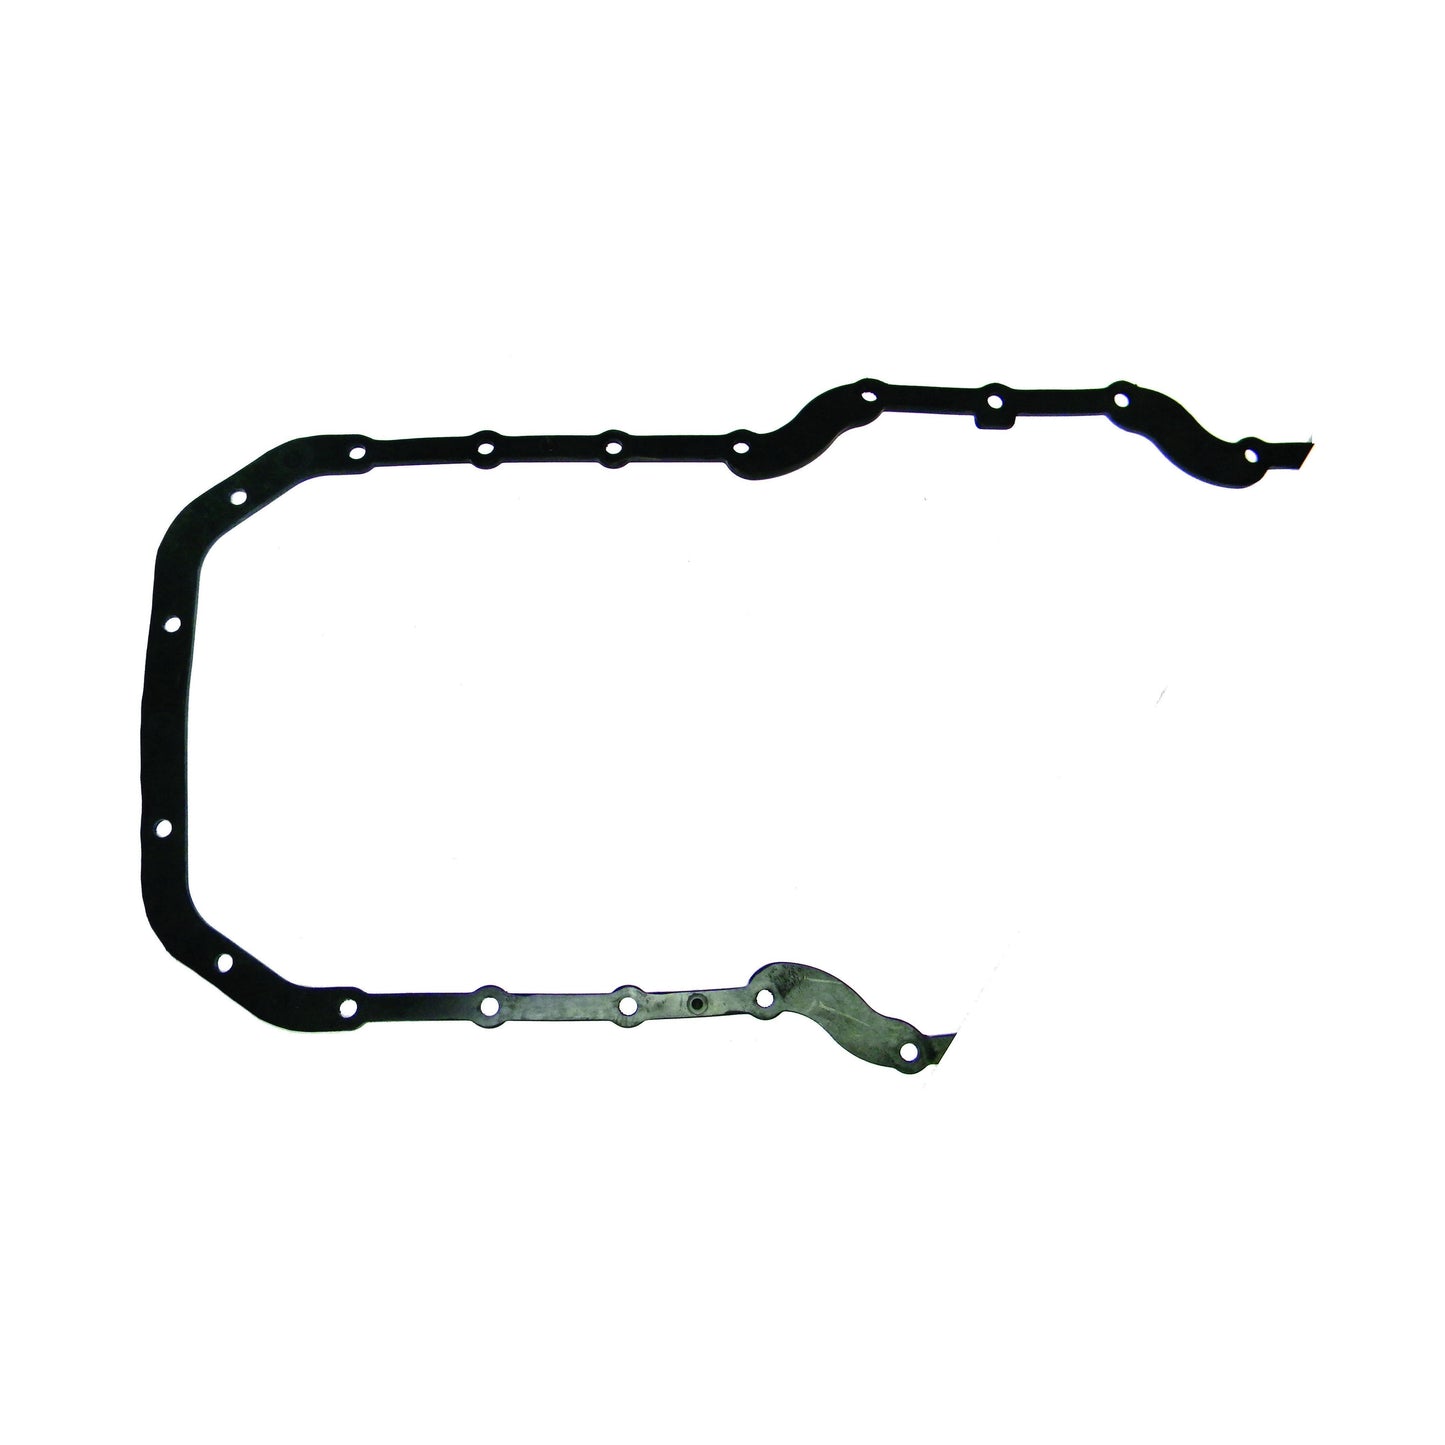 F010027 | F579GB422 GASKET,OIL PAN (RUBBER) E7 | Replace EGK-8439